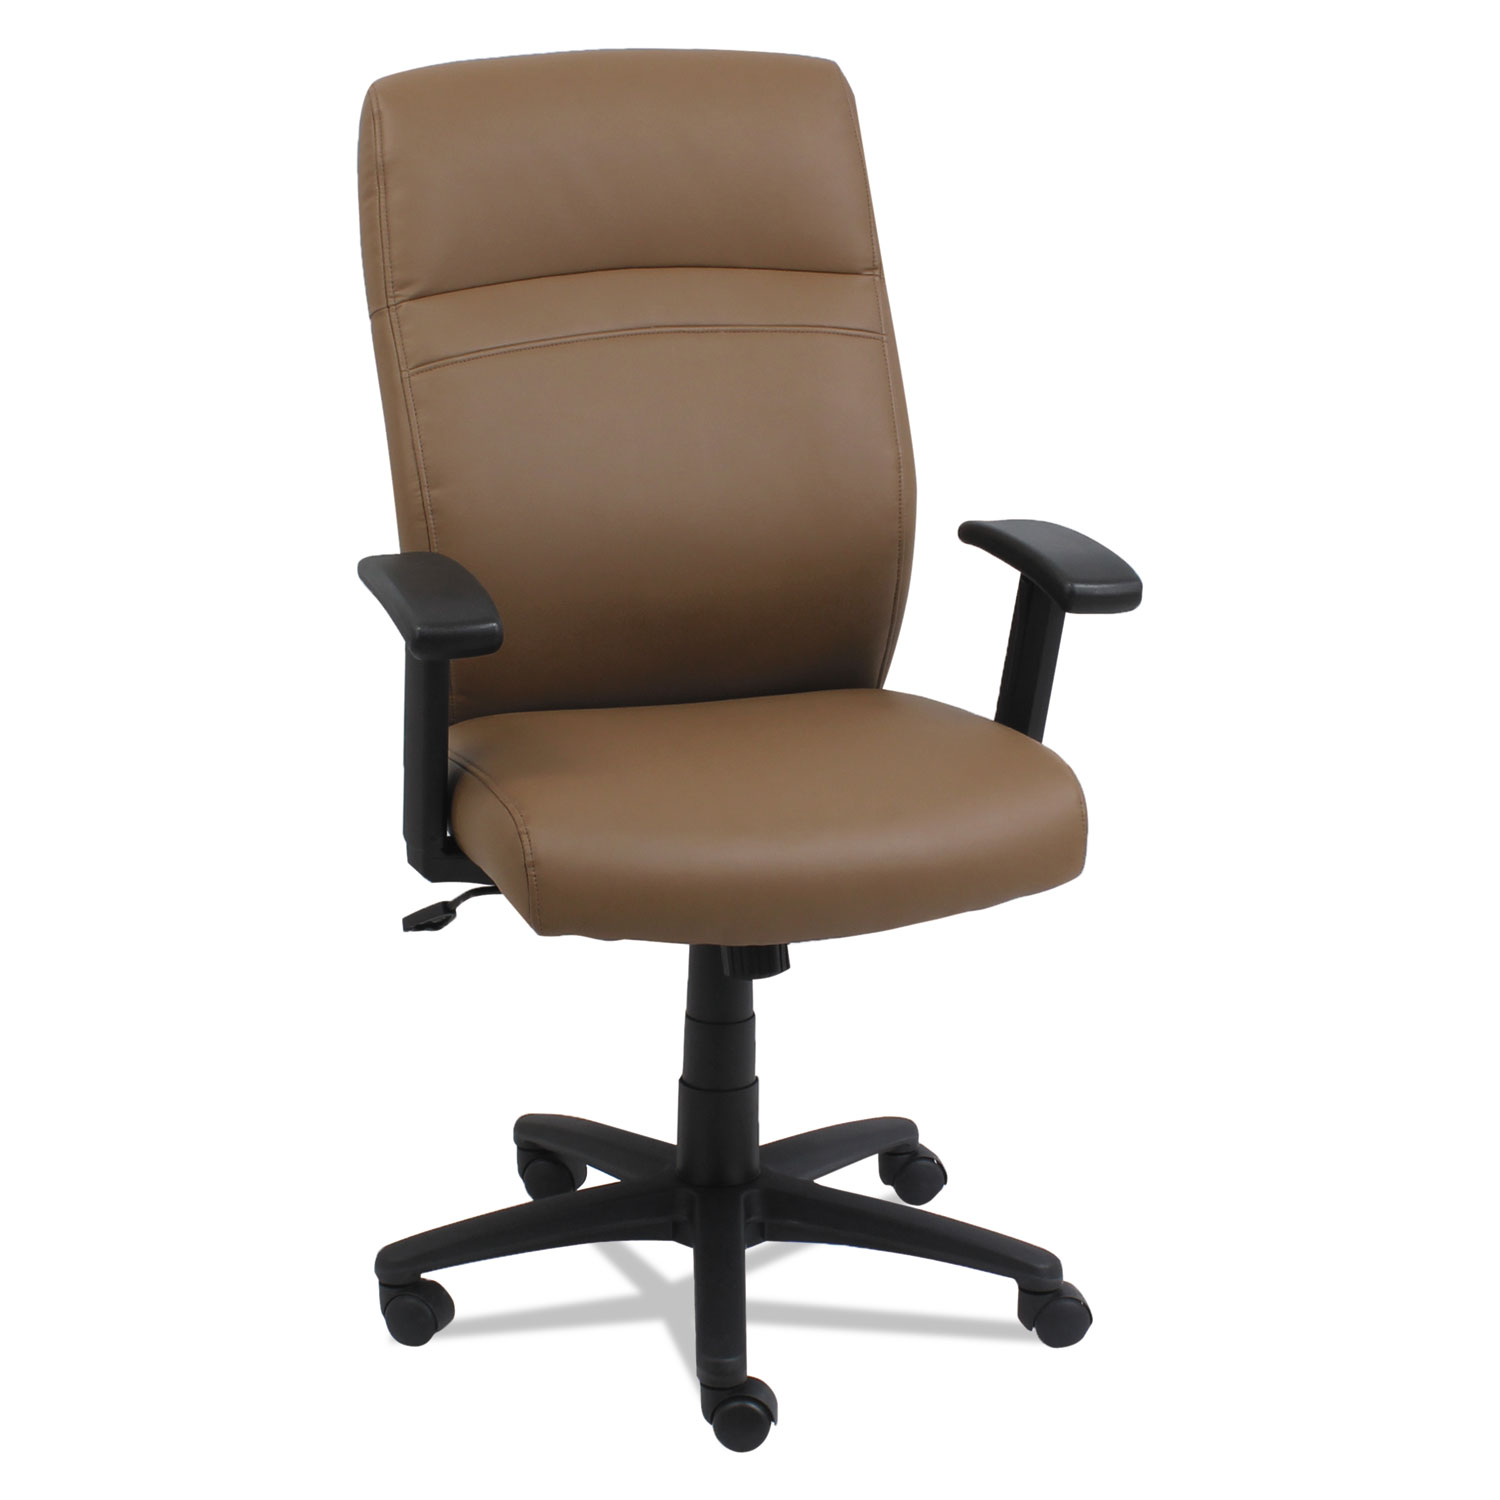  Alera ALECA4159 High-Back Swivel/Tilt Leather Chair, Supports up to 275 lbs., Taupe Seat/Taupe Back, Black Base (ALECA4159) 